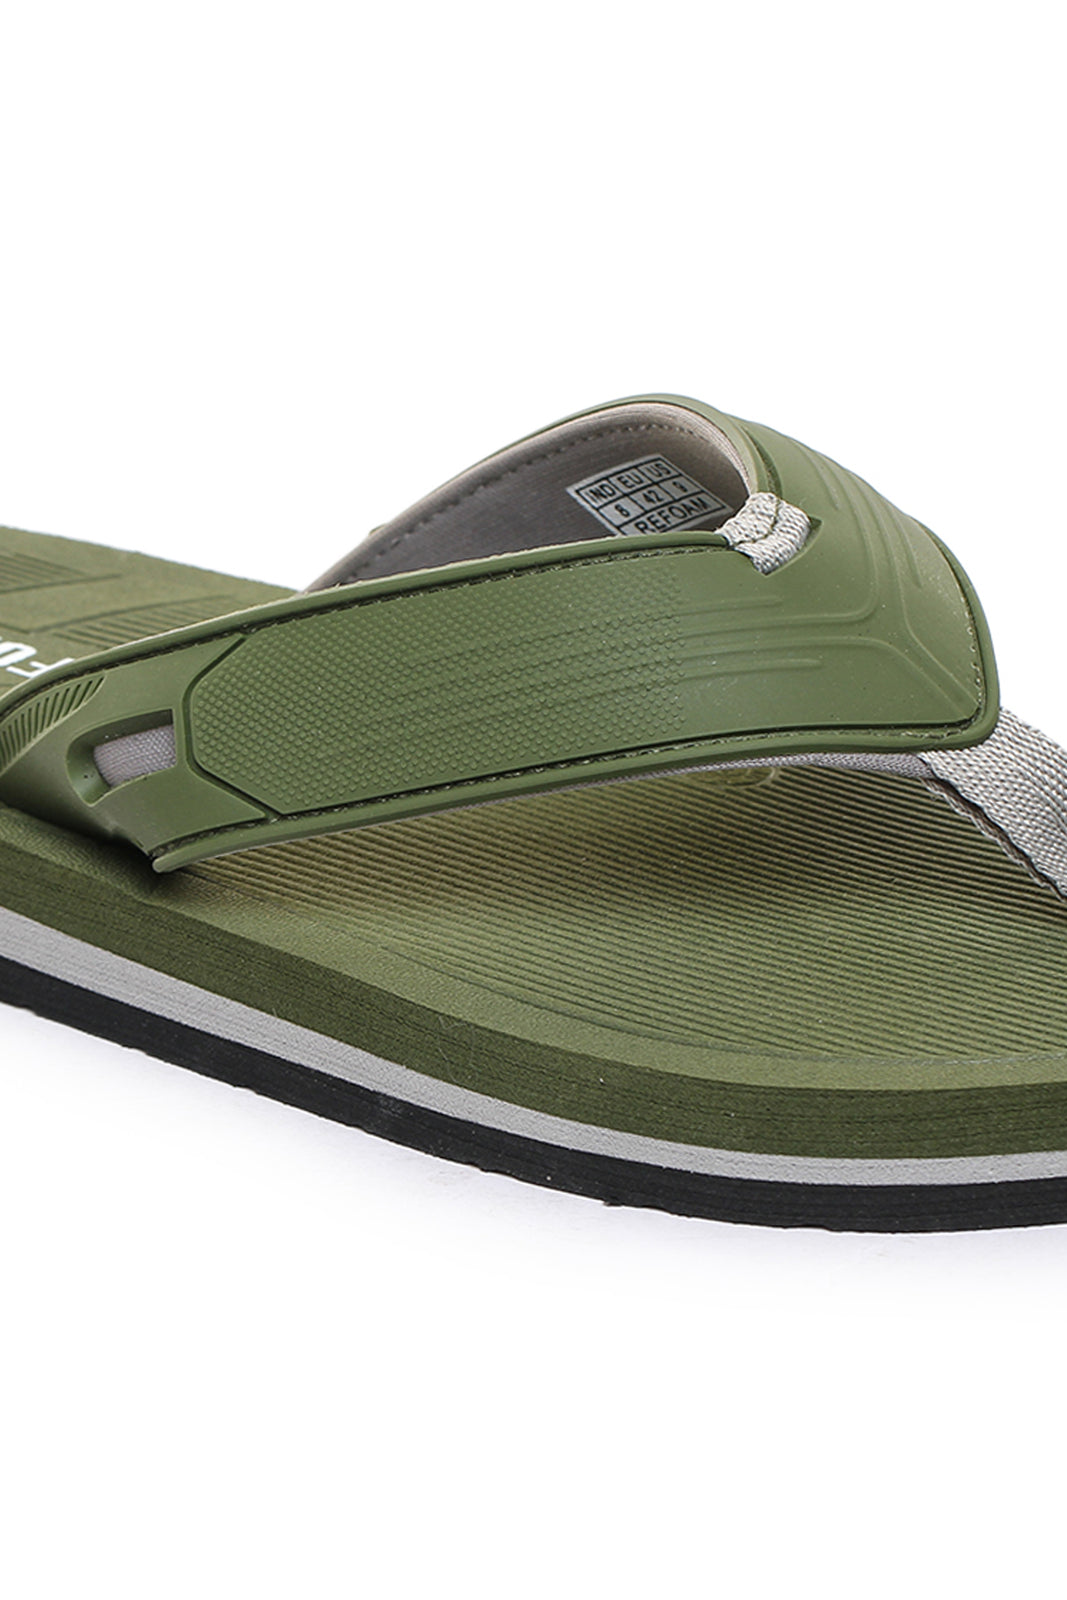 Green Solid Rubber Slip On Casual Slippers For Men